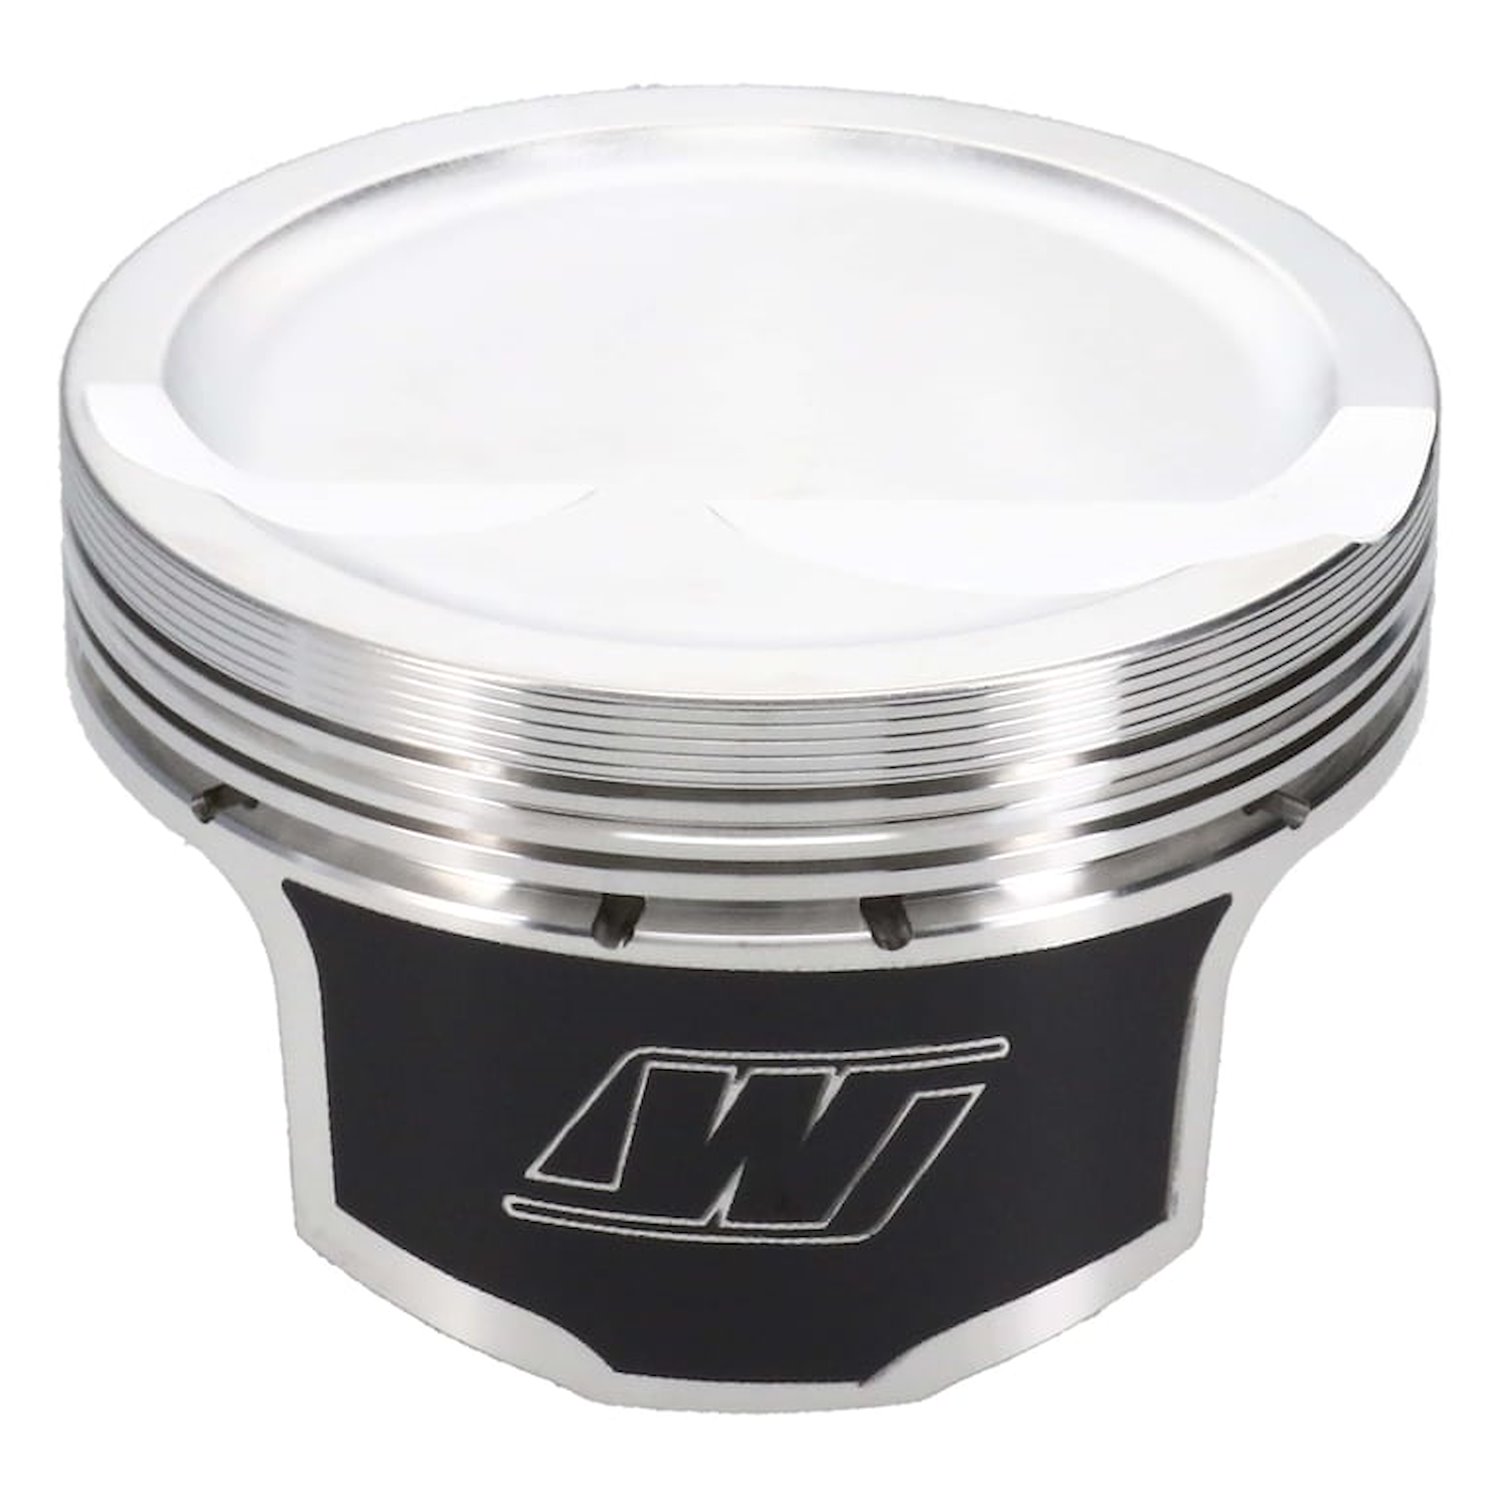 RED0081X125 RED-Series Piston Set, Chevy LS, 4.125 in. Bore, -15 cc Dish